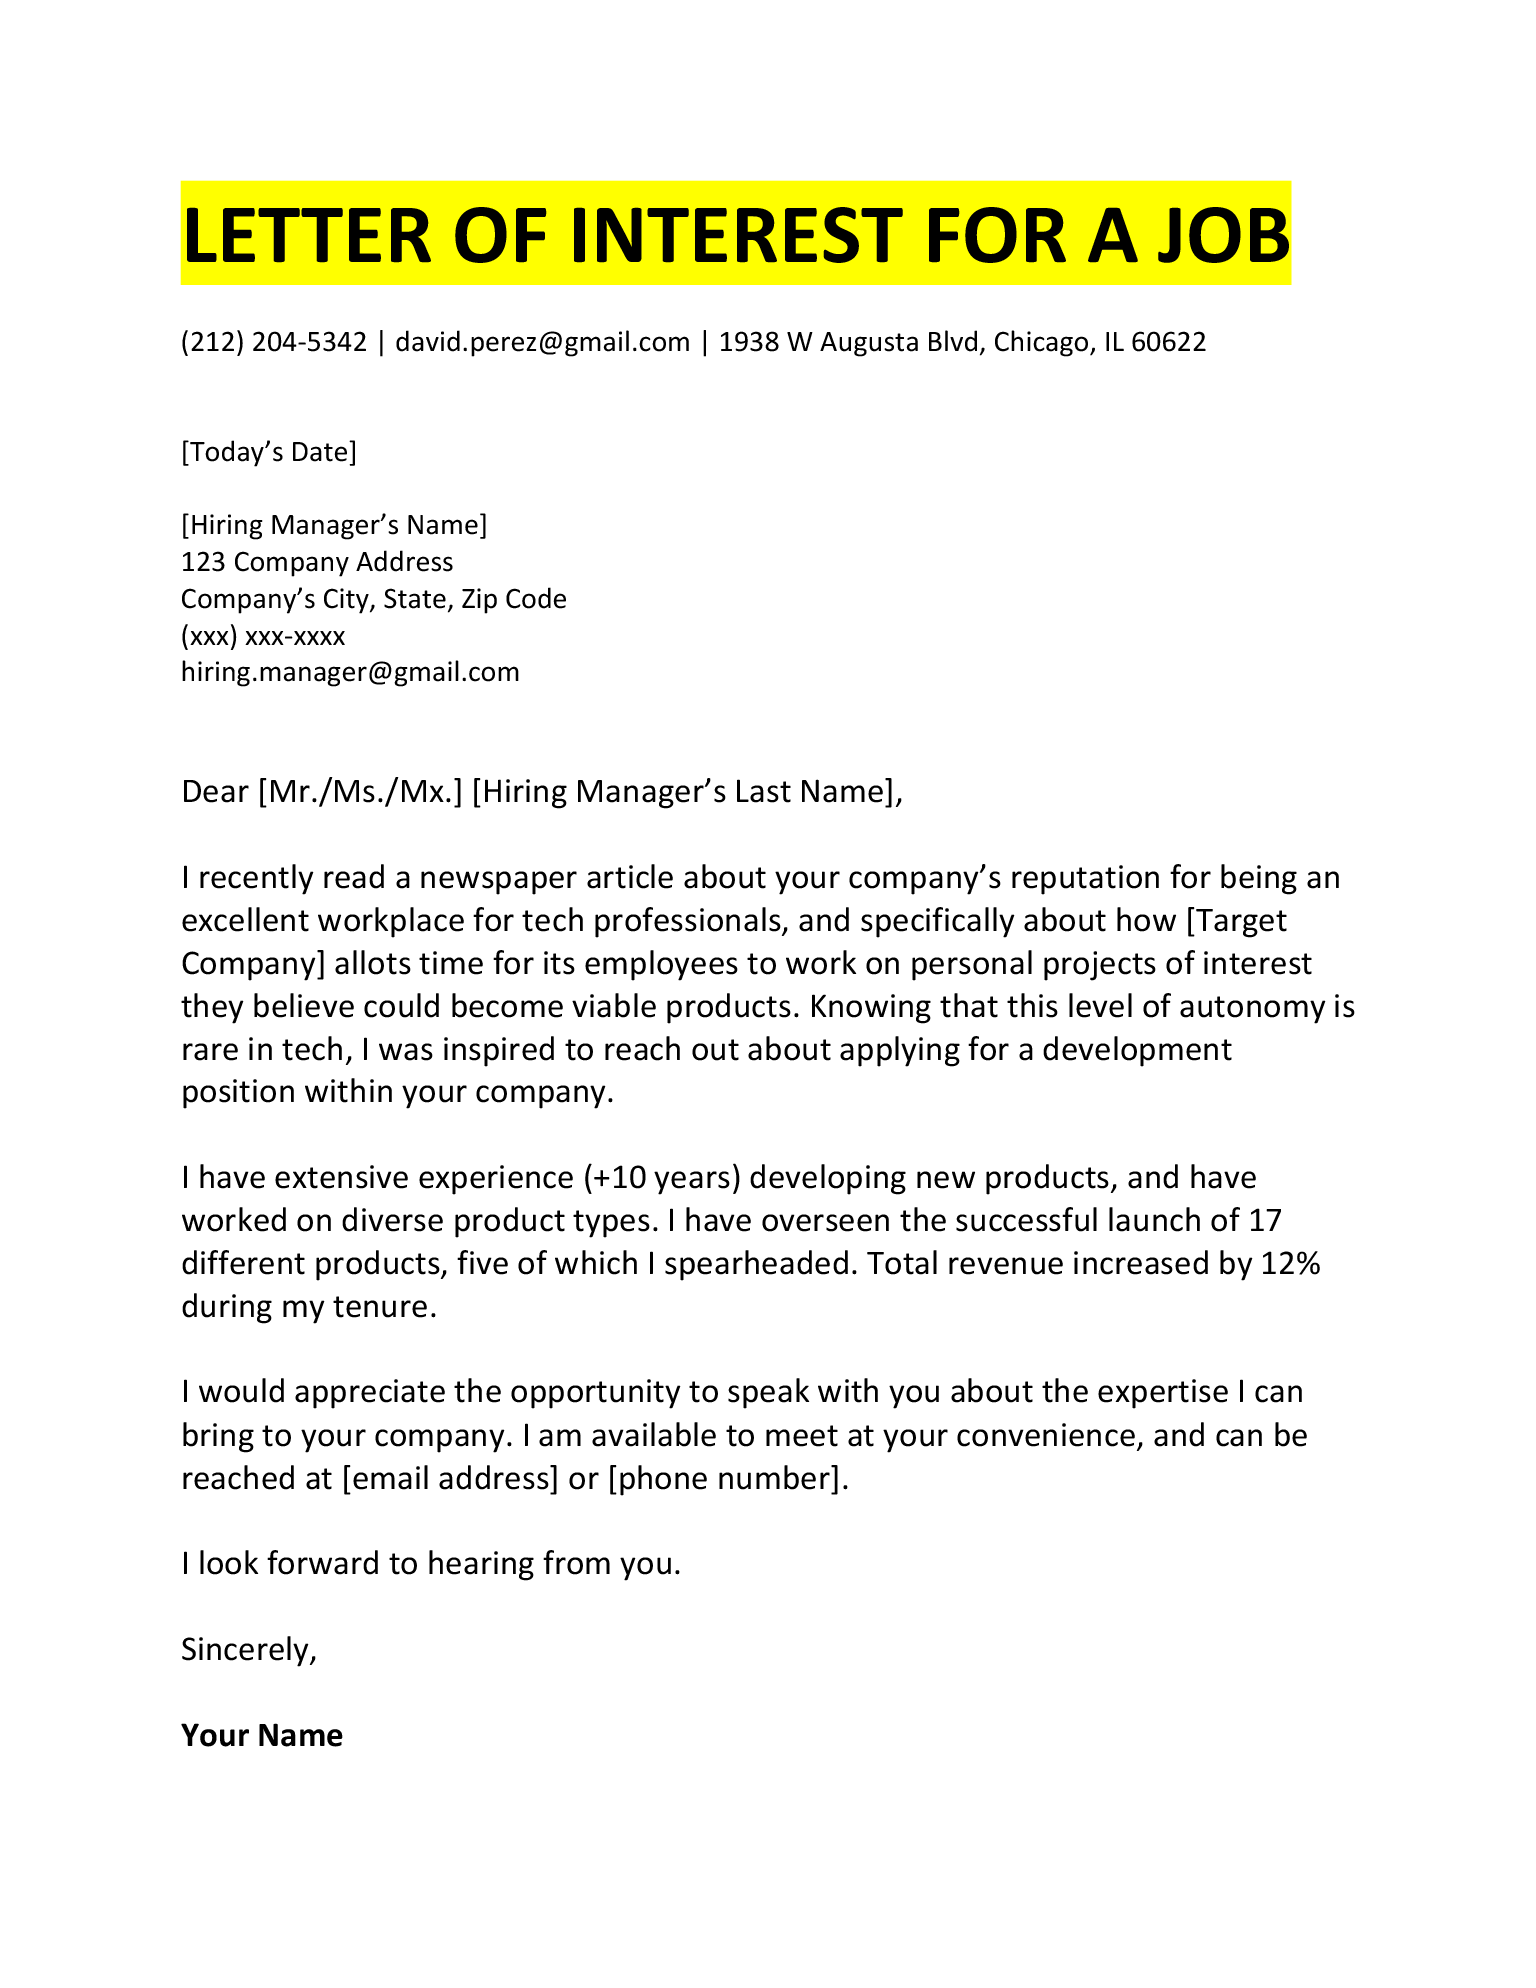 Example of a letter of interest for a job.